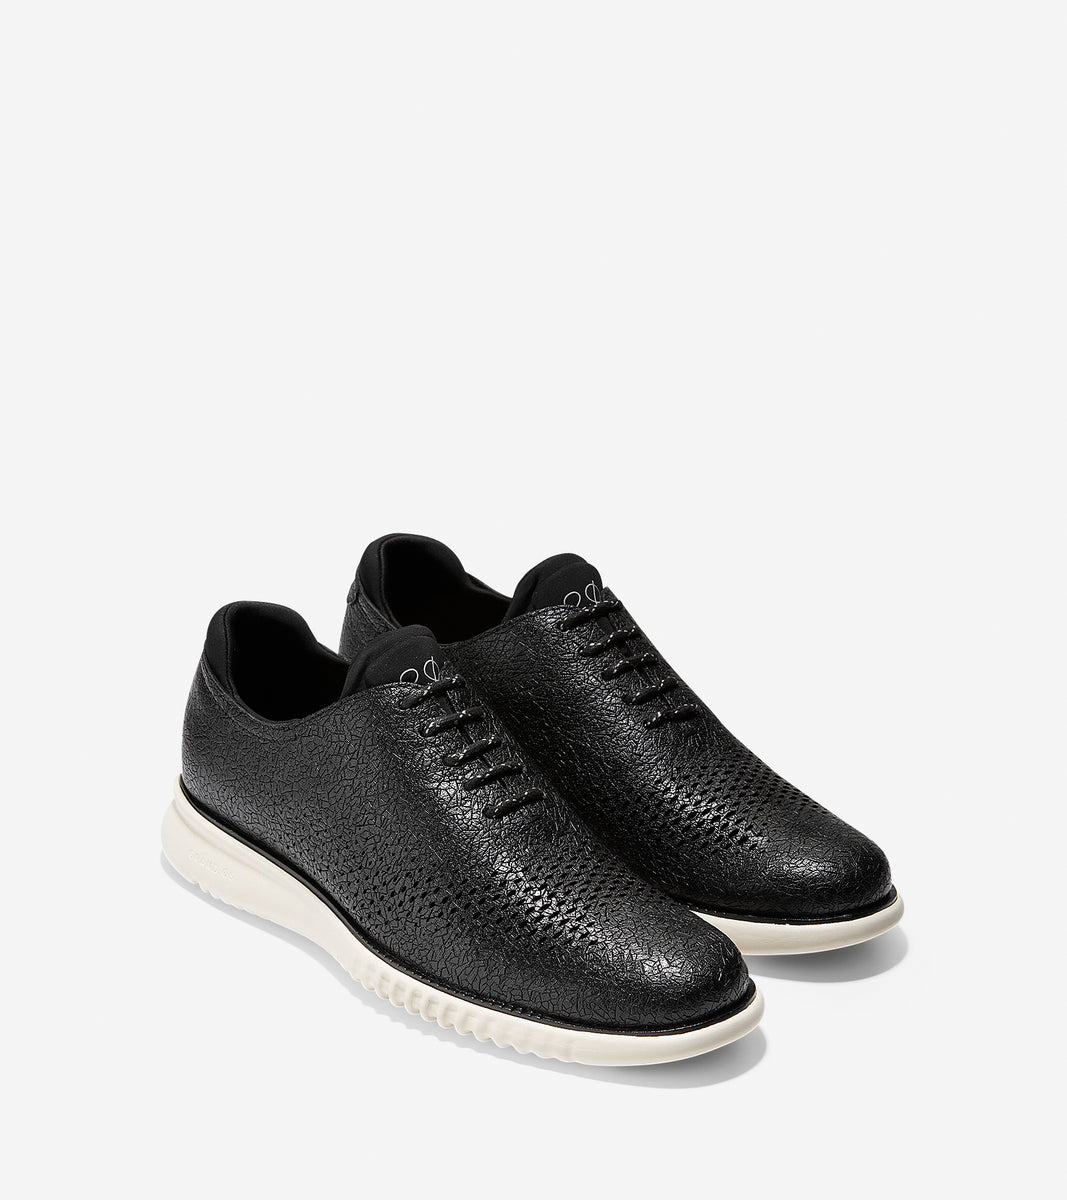 ColeHaan-2.ZERØGRAND Lined Laser Wingtip Oxford-c28587-Black Textured Leather-ivory